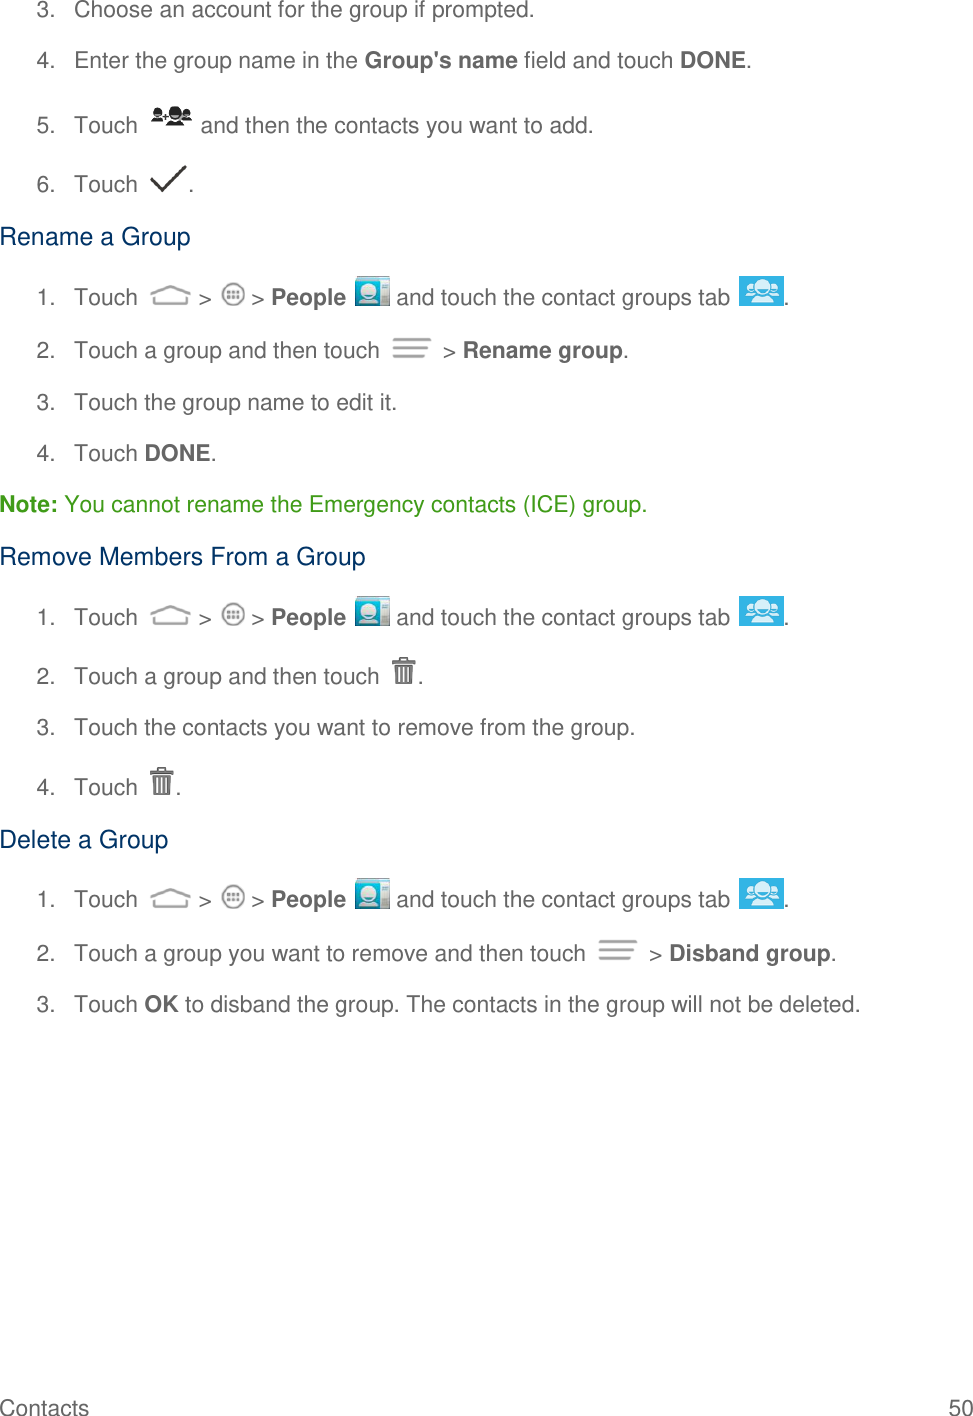 Contacts  50 3.  Choose an account for the group if prompted. 4.  Enter the group name in the Group&apos;s name field and touch DONE. 5.  Touch   and then the contacts you want to add. 6.  Touch  . Rename a Group 1.  Touch   &gt;   &gt; People   and touch the contact groups tab  . 2.  Touch a group and then touch   &gt; Rename group. 3.  Touch the group name to edit it. 4.  Touch DONE. Note: You cannot rename the Emergency contacts (ICE) group. Remove Members From a Group 1.  Touch   &gt;   &gt; People   and touch the contact groups tab  . 2.  Touch a group and then touch  . 3.  Touch the contacts you want to remove from the group. 4.  Touch  . Delete a Group 1.  Touch   &gt;   &gt; People   and touch the contact groups tab  . 2.  Touch a group you want to remove and then touch   &gt; Disband group. 3.  Touch OK to disband the group. The contacts in the group will not be deleted.  